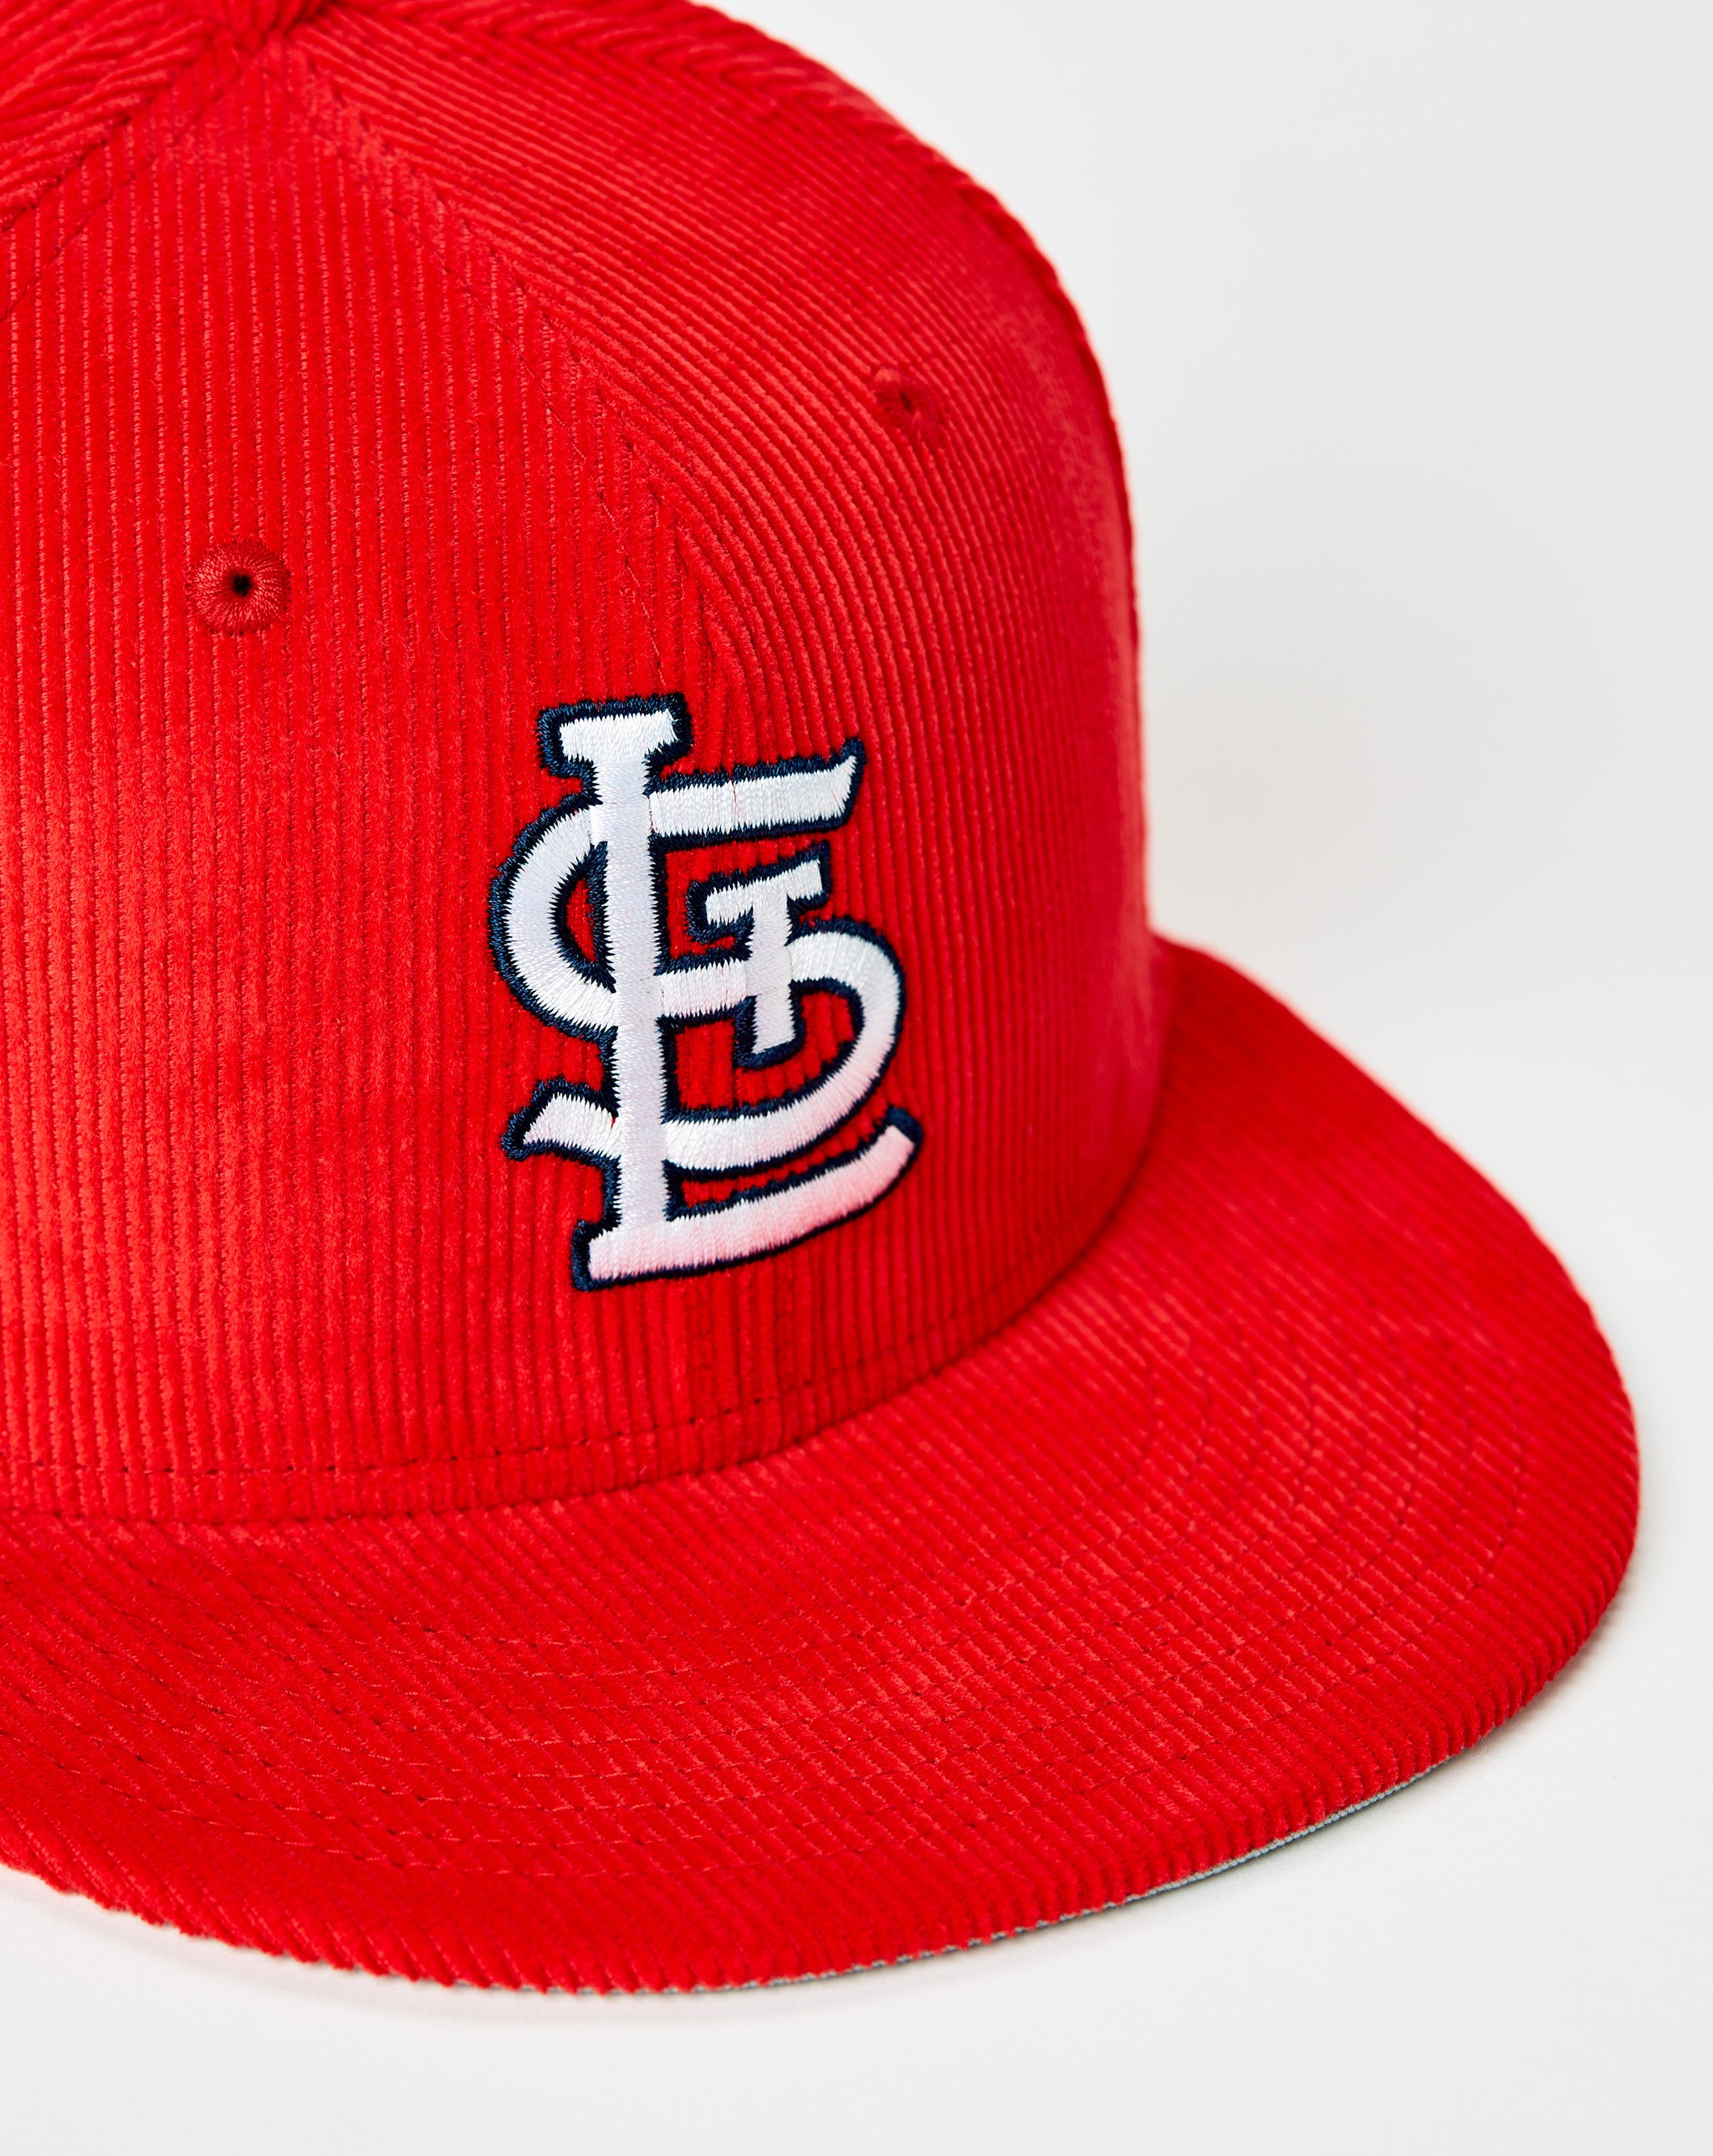 New Era Red / 7 7/8 - Sold Out  - Cheap Cerbe Jordan outlet